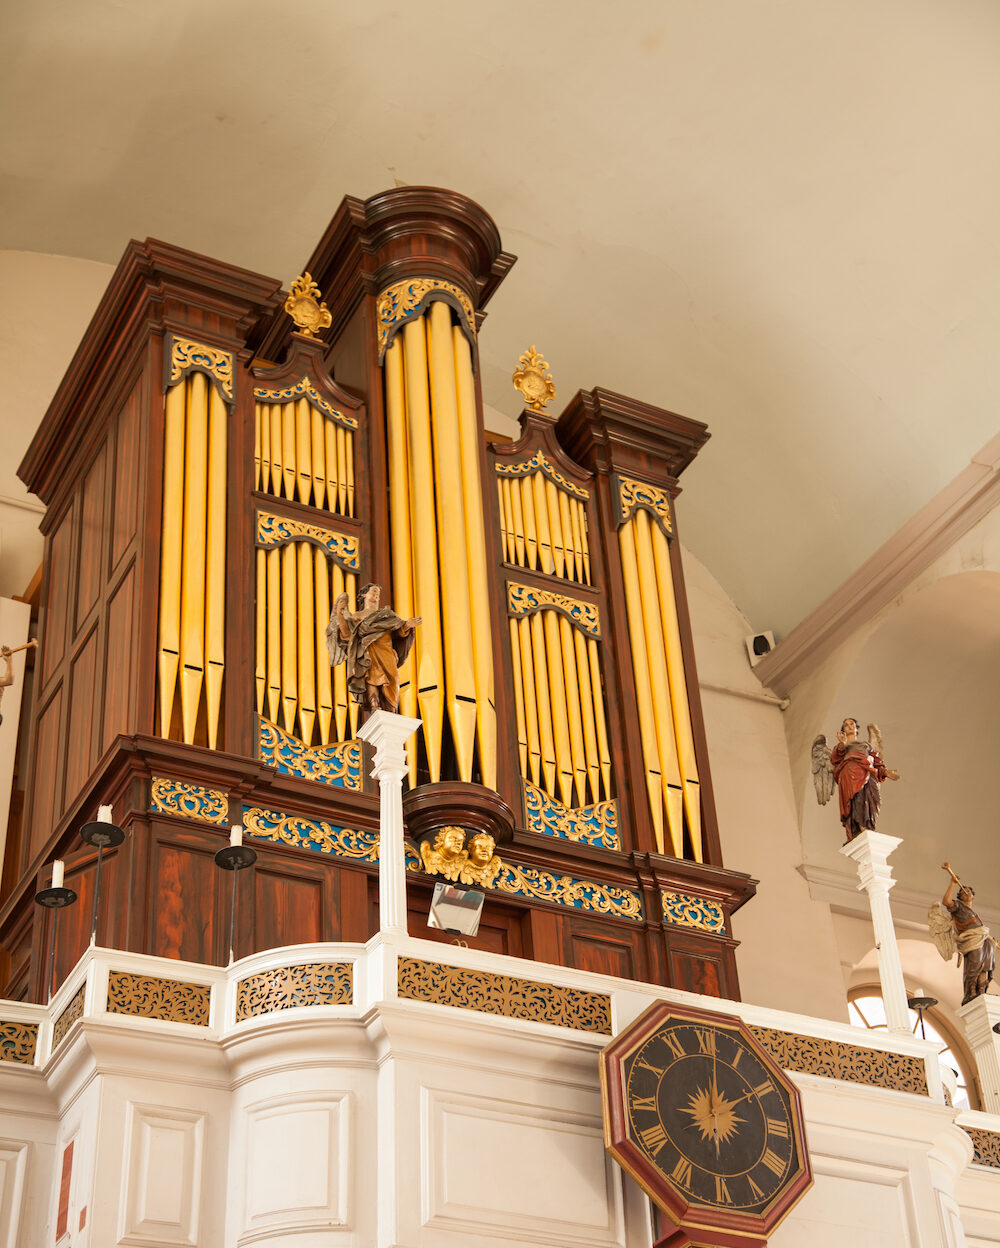 The pipe organ and carved angels in the gallery of the Old North Church.